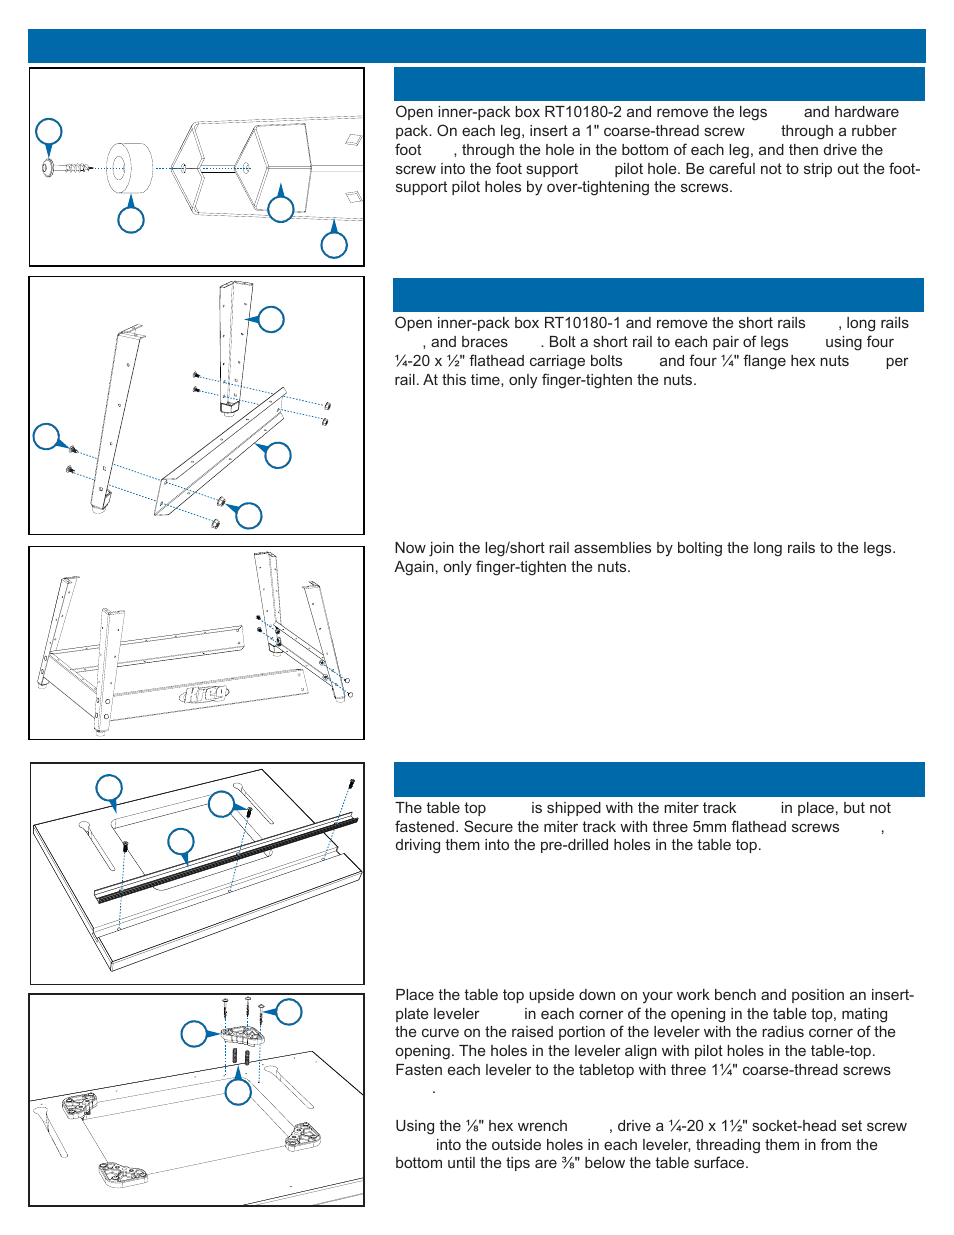 Benchtop router table assembly instructions | Kreg PRS2100 Precision Benchtop Router Table User Manual | Page 5 / 28